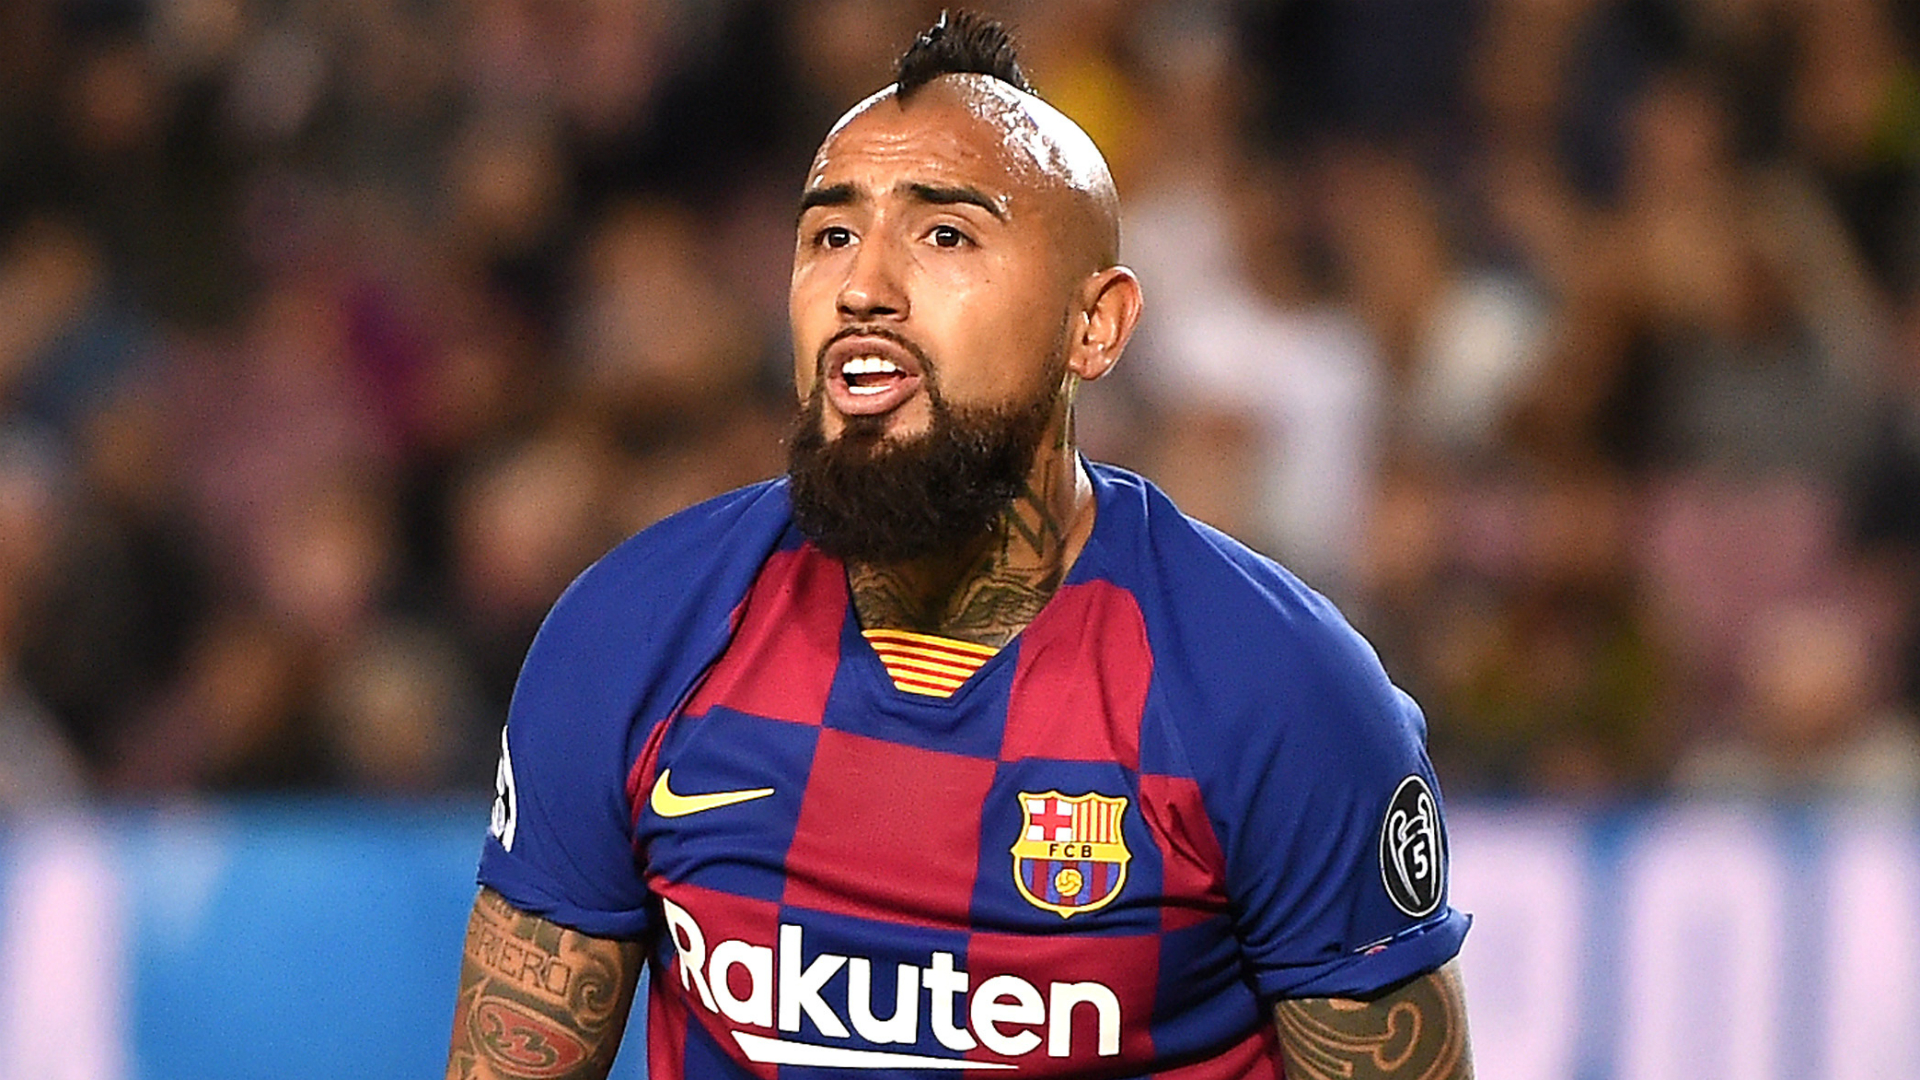 Arturo Vidal is linked with a move to Inter, but the midfielder said he was happy at Barcelona.